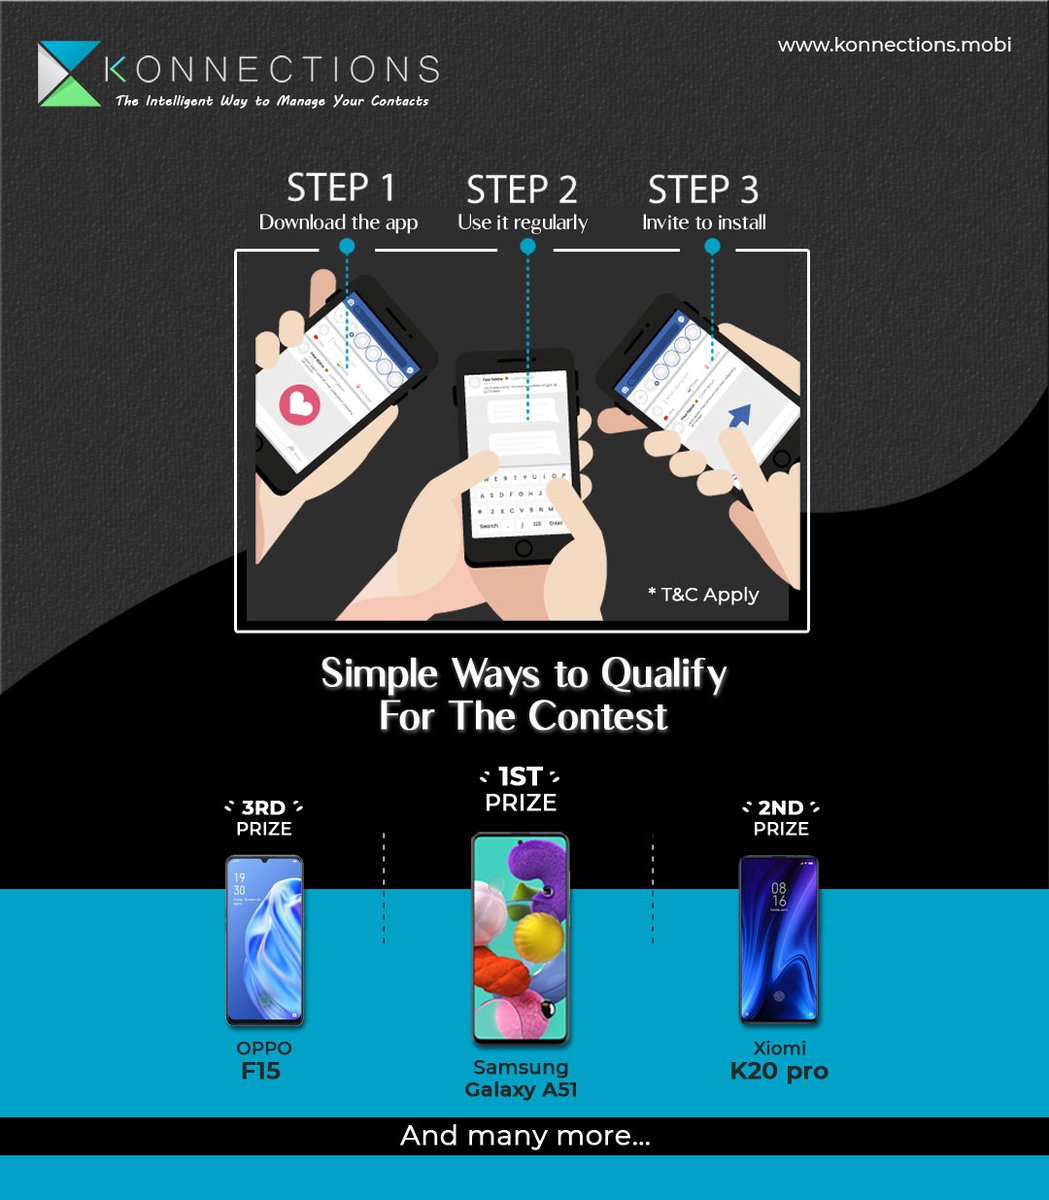 Here are the tips to win the contest
1) Download the #app
2) Use the app regularly
3) Invite family and friends to #install the app
Download link bit.ly/2SKQ53S

#advancedapp #contactmanagement #connections #phonebook #phonebookupdate #socialphonebook #konnections